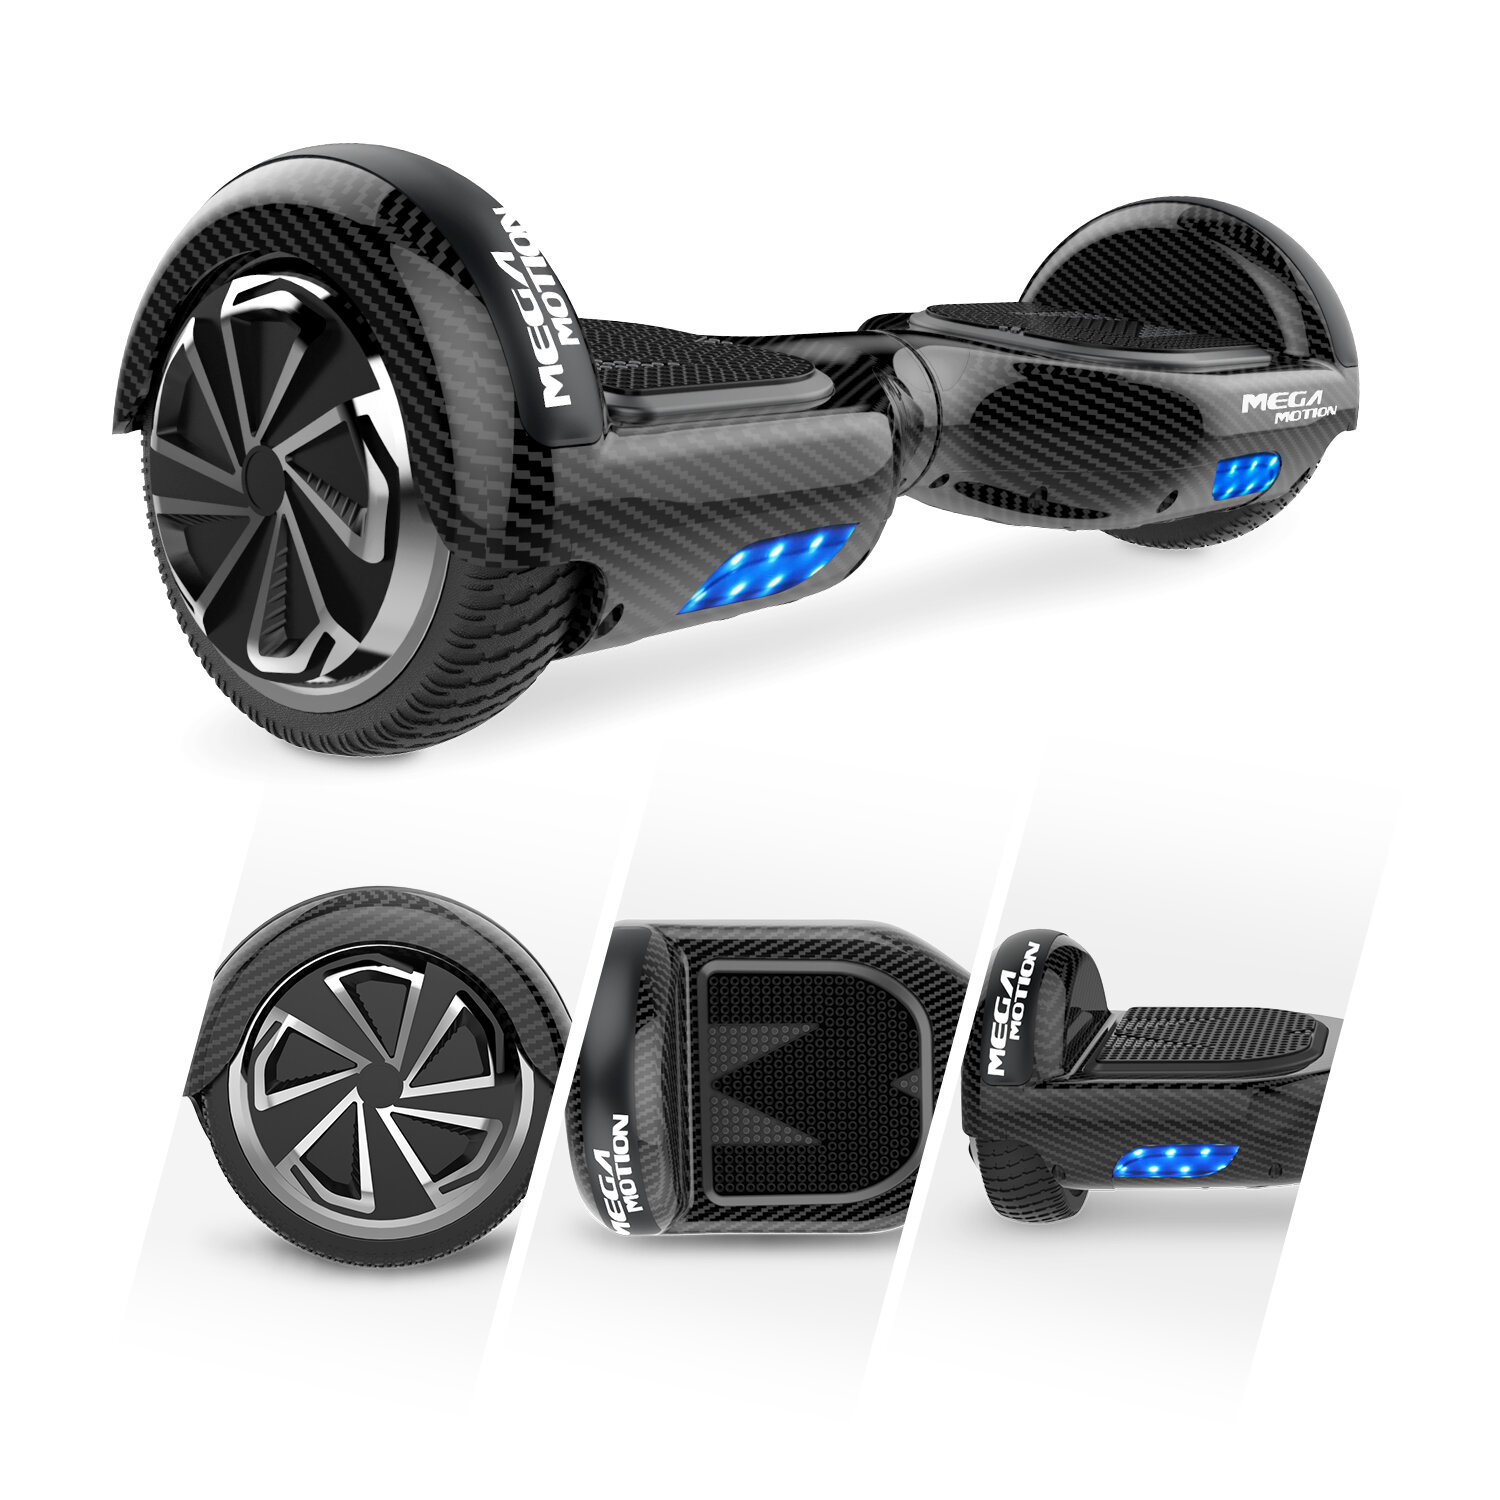 Mega Motion 6.5'' Self Balanced Electric Scooter For Kids Super Gifts